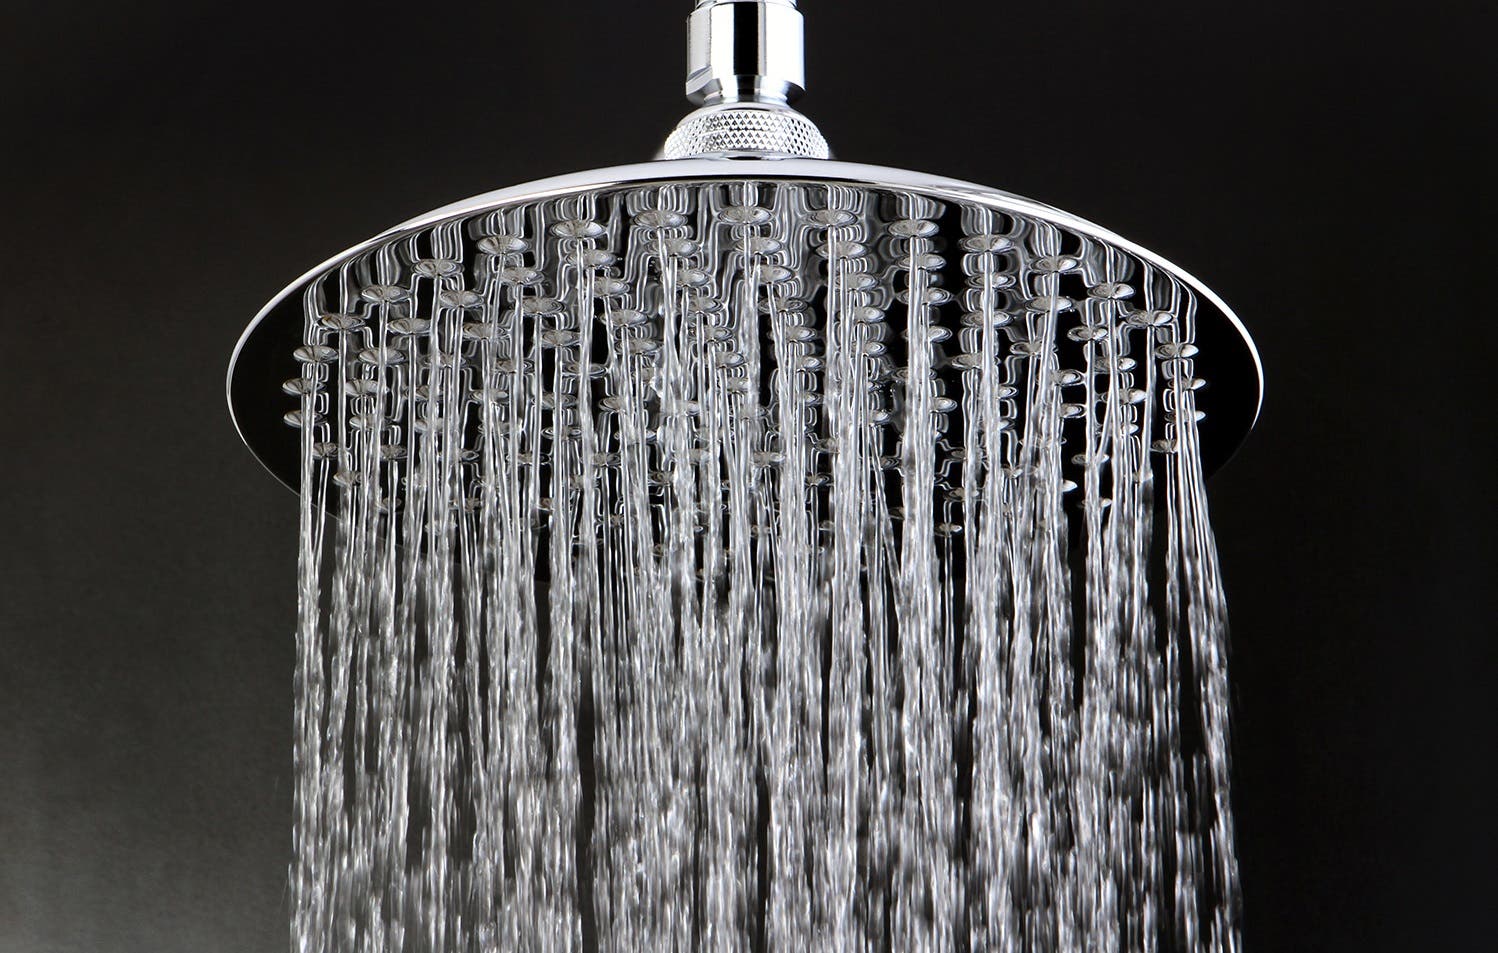 How to find the perfect Kingston Brass showerhead